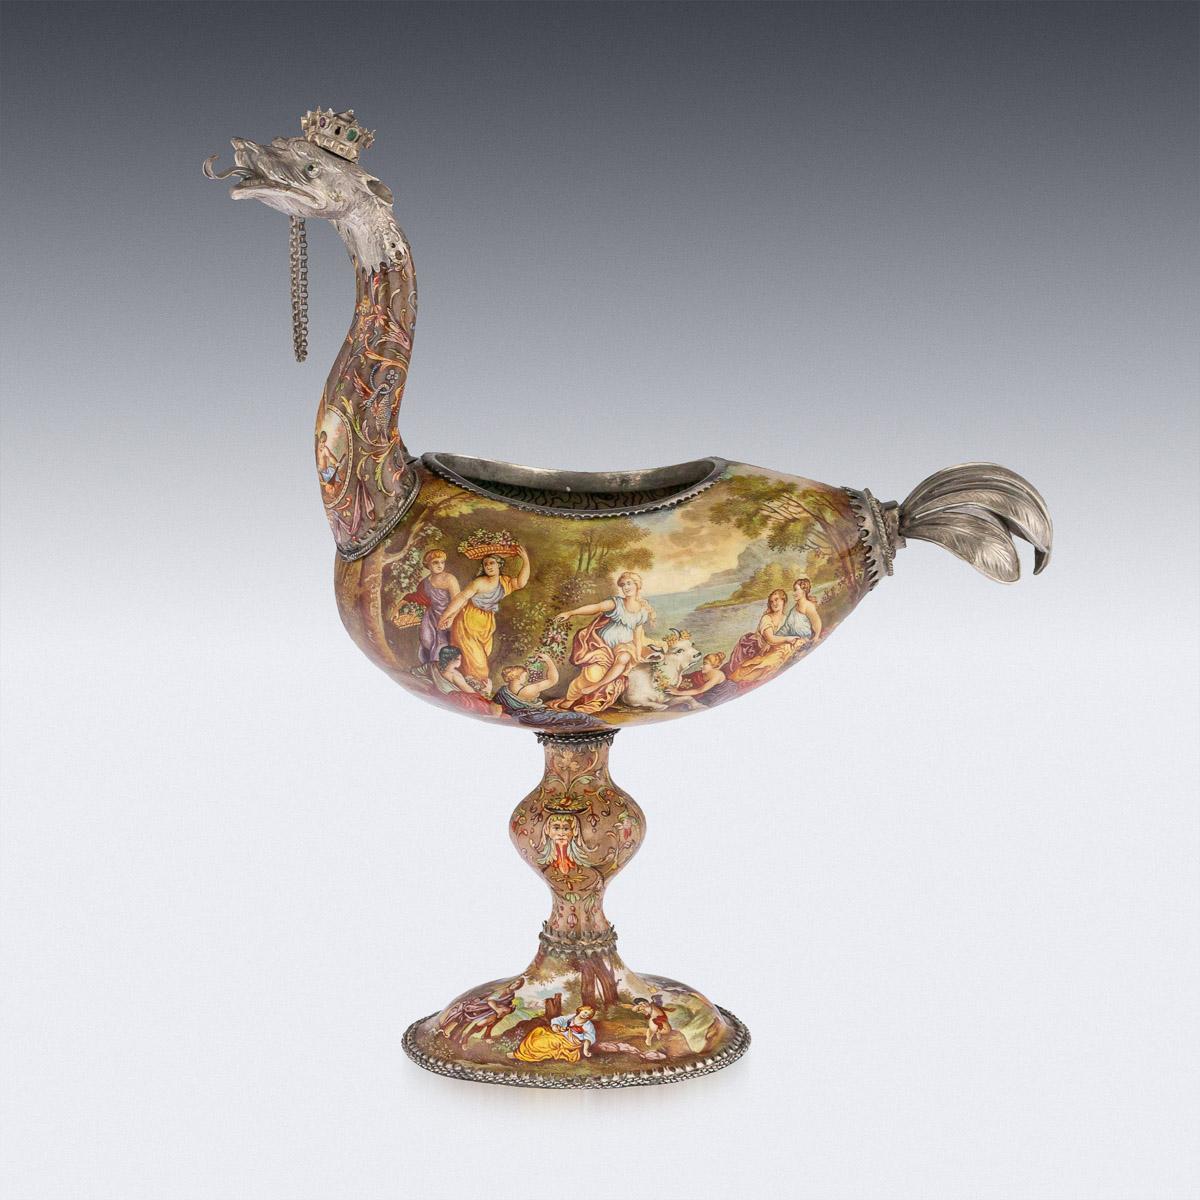 Antique late 19th century Austrian exceptional solid silver, enamel and gem set two-headed cup, standing on an oval base, shaped bulbous stem and the body hand painted with classical allegorical scenes, the mythical ostrich heads surmounted by